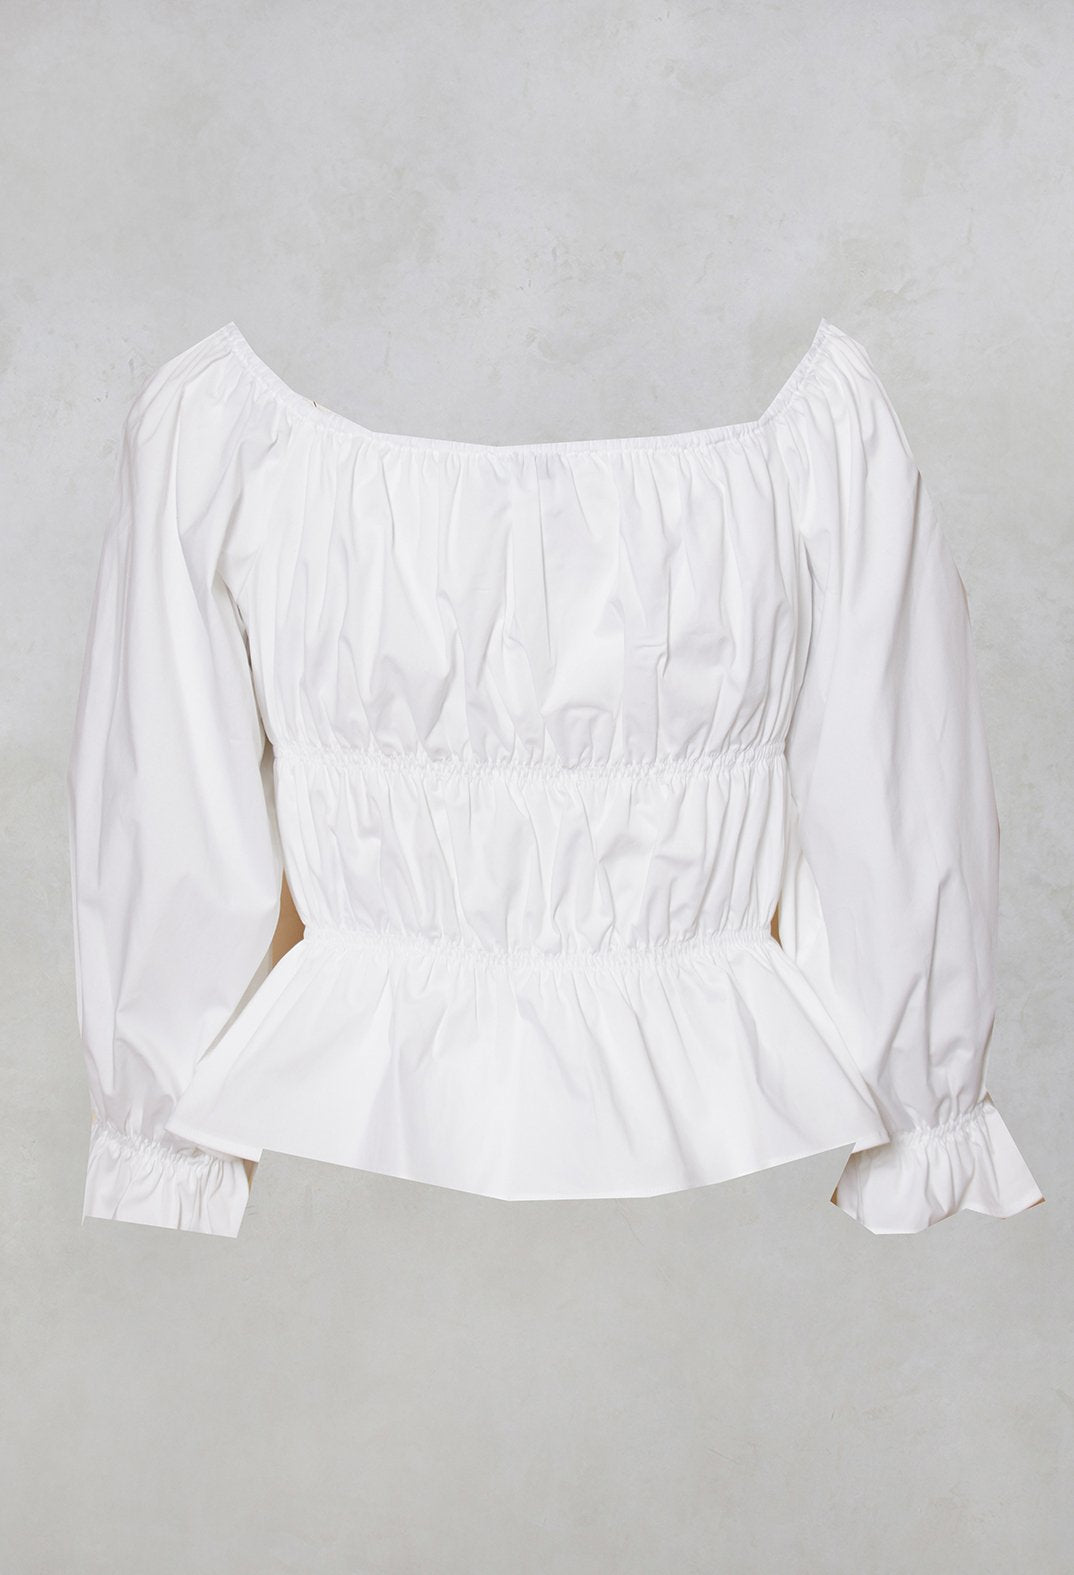 Beatrice B milkmaid blouse in white with long sleeves